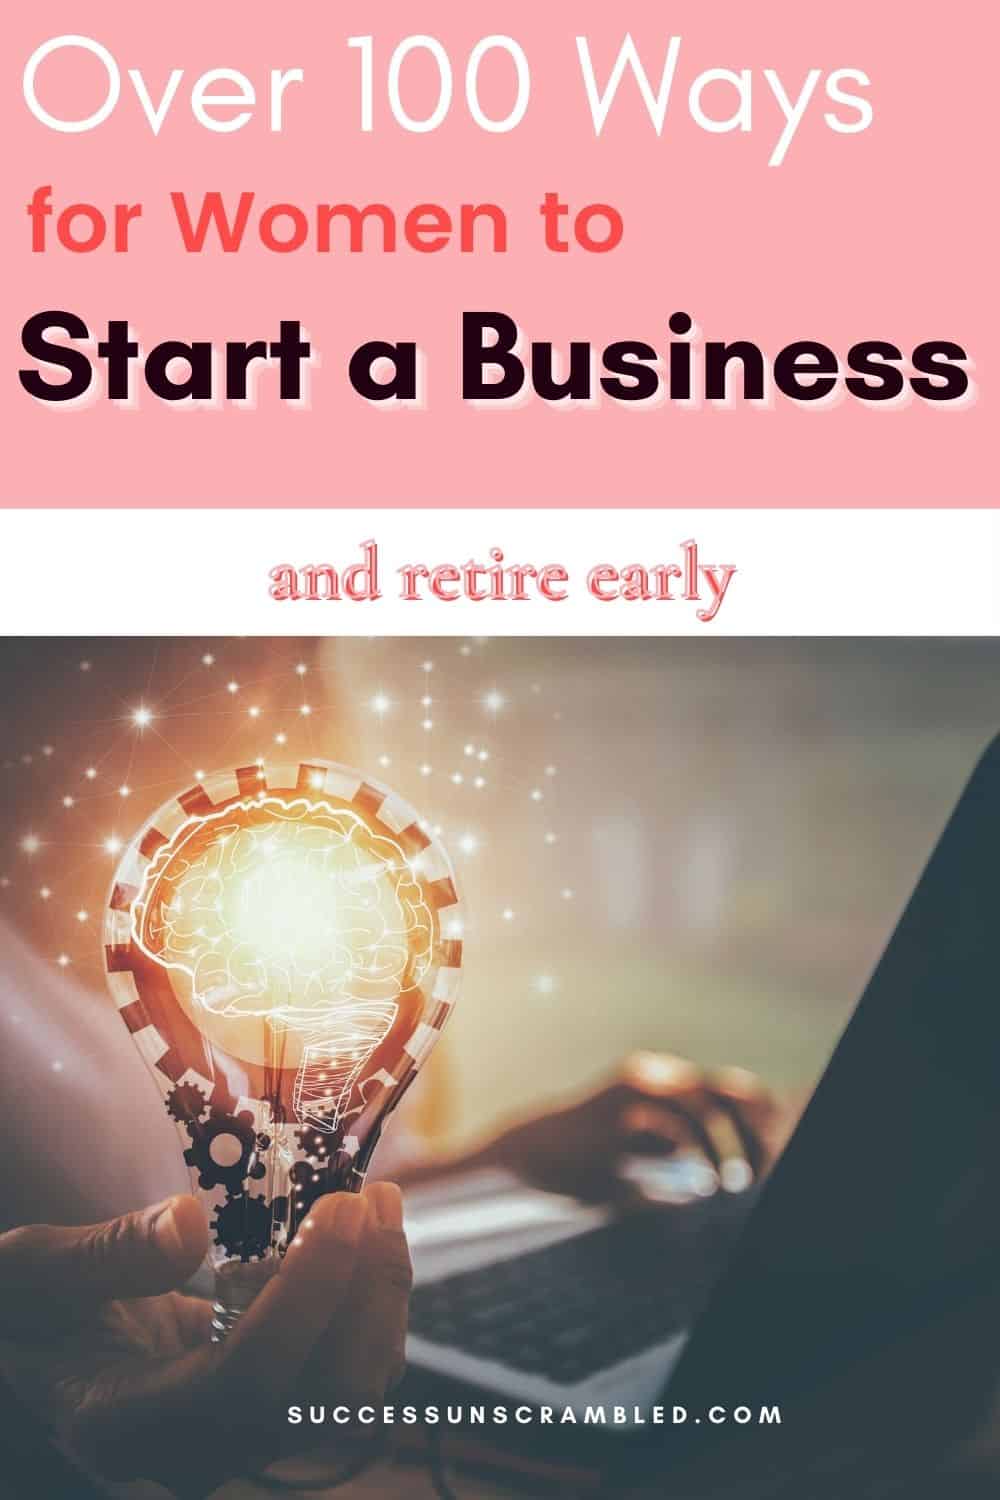 Over 100 ways for women to start a business and retire early pin
